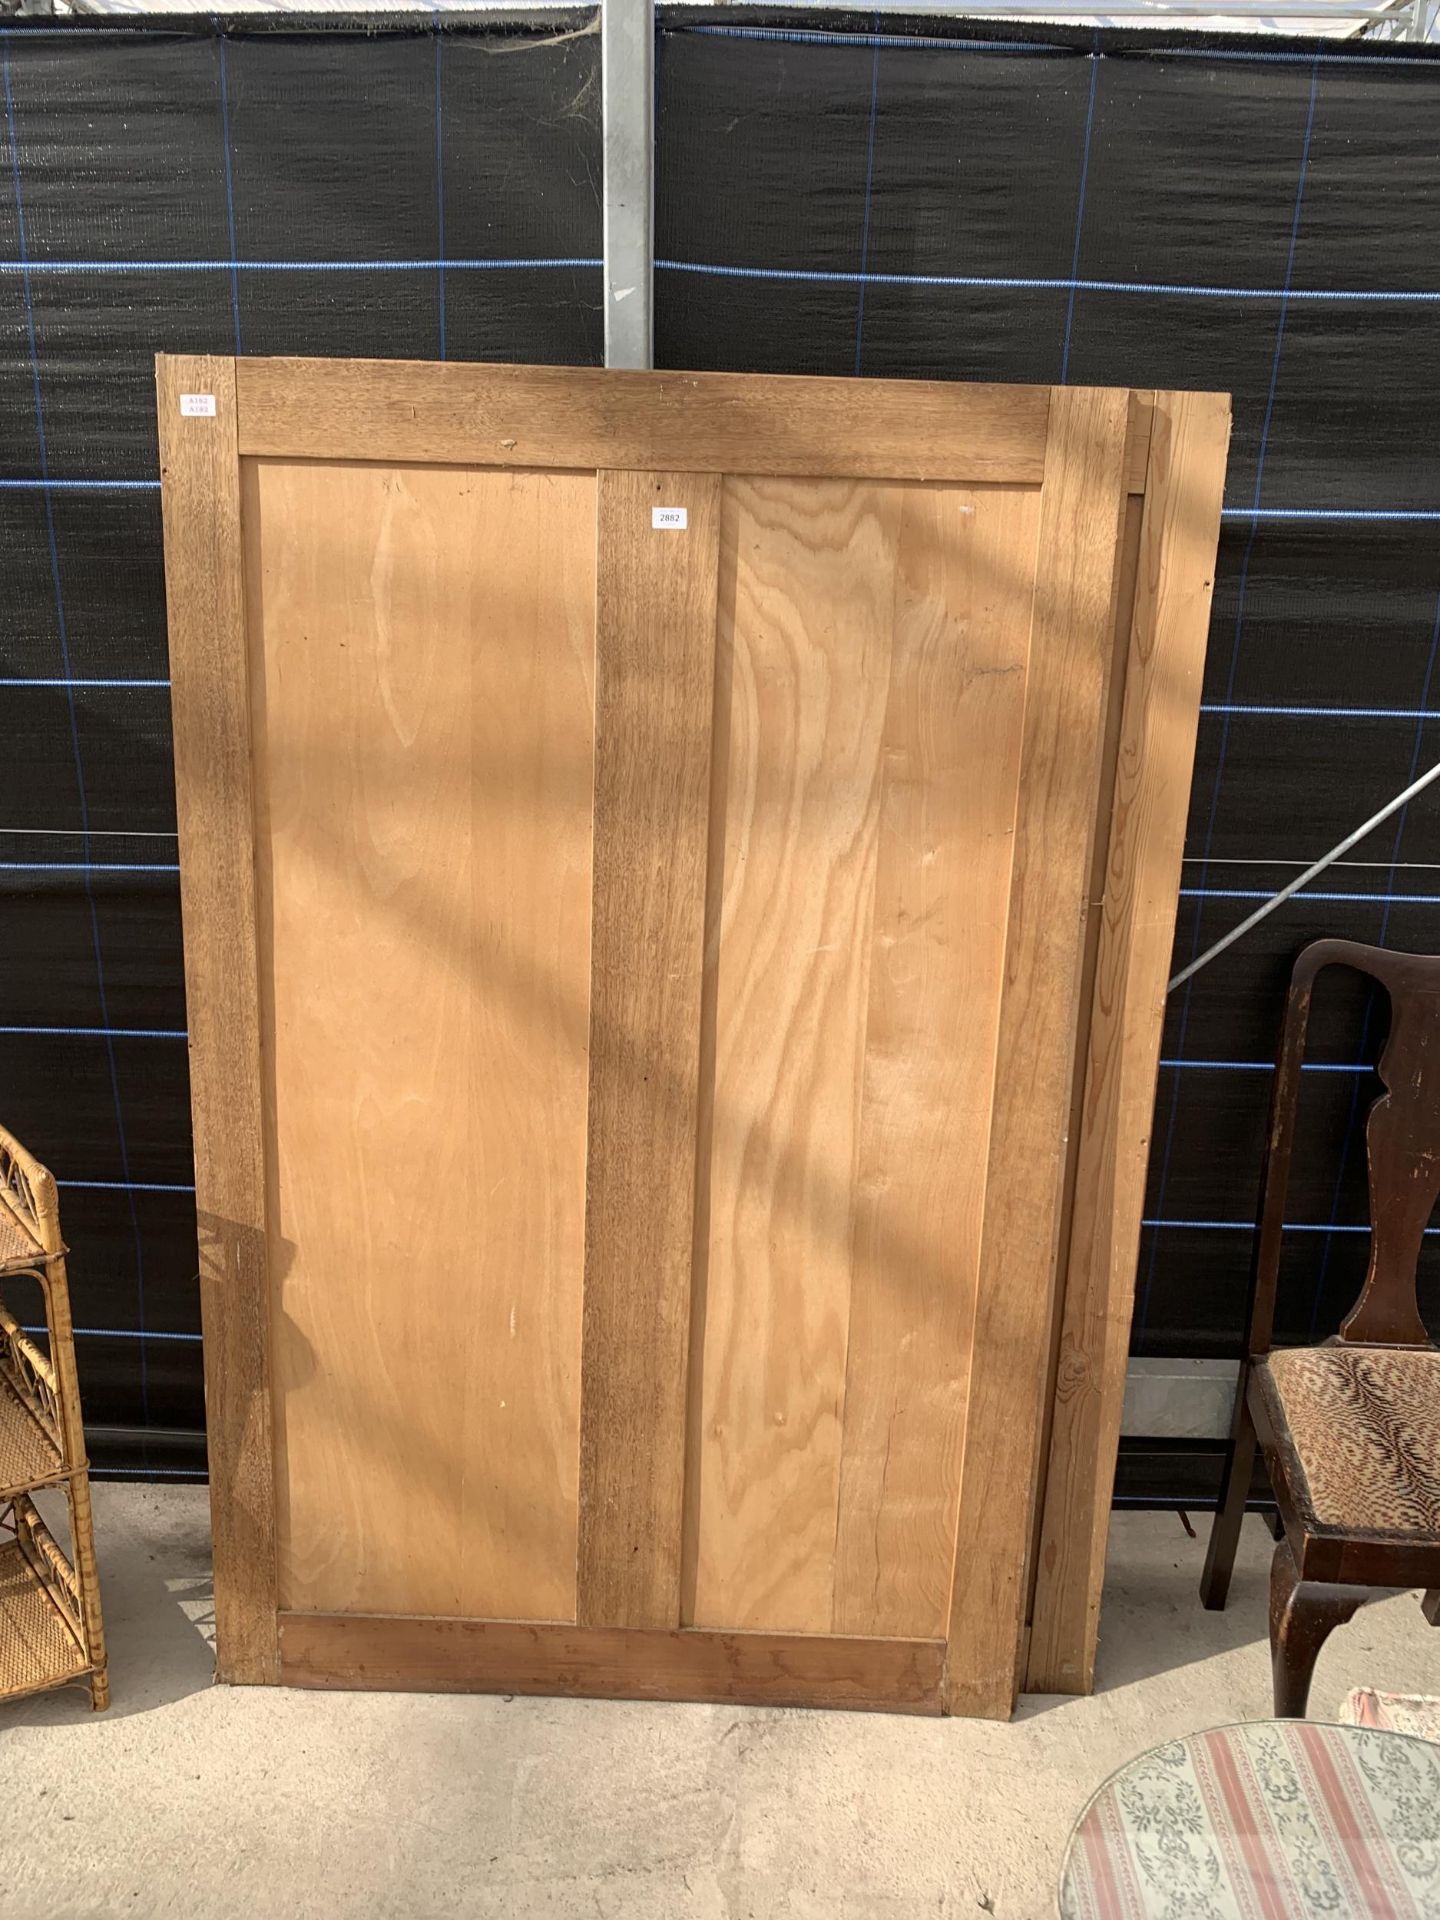 TWO WOODEN PANELS 66" X 42" EACH